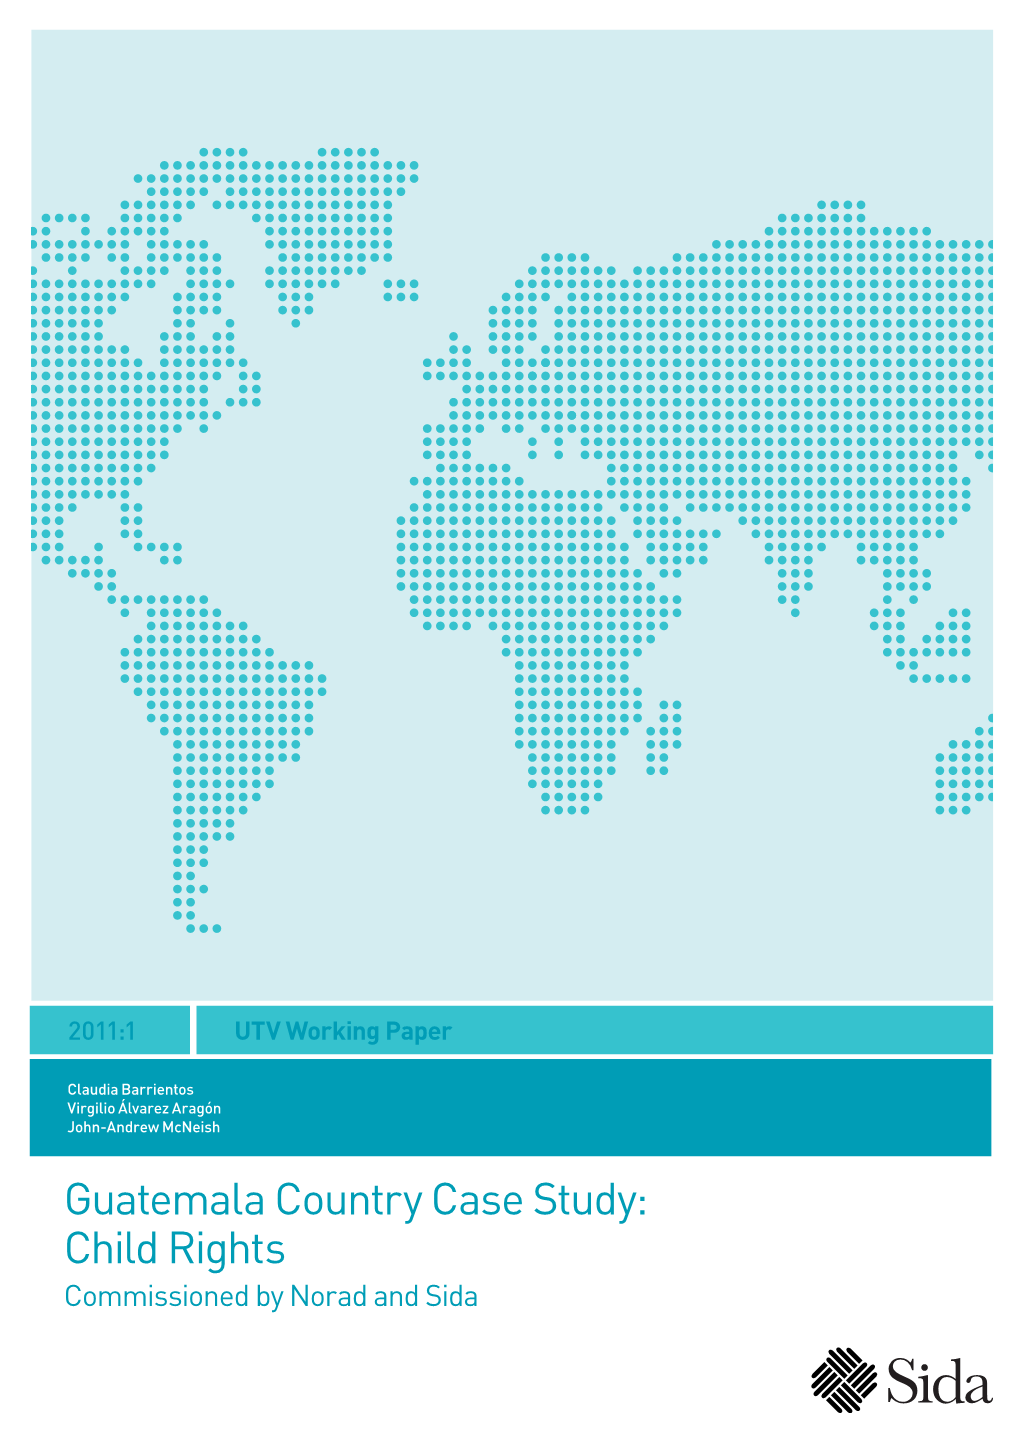 Guatemala Country Case Study: Child Rights Commissioned by Norad and Sida